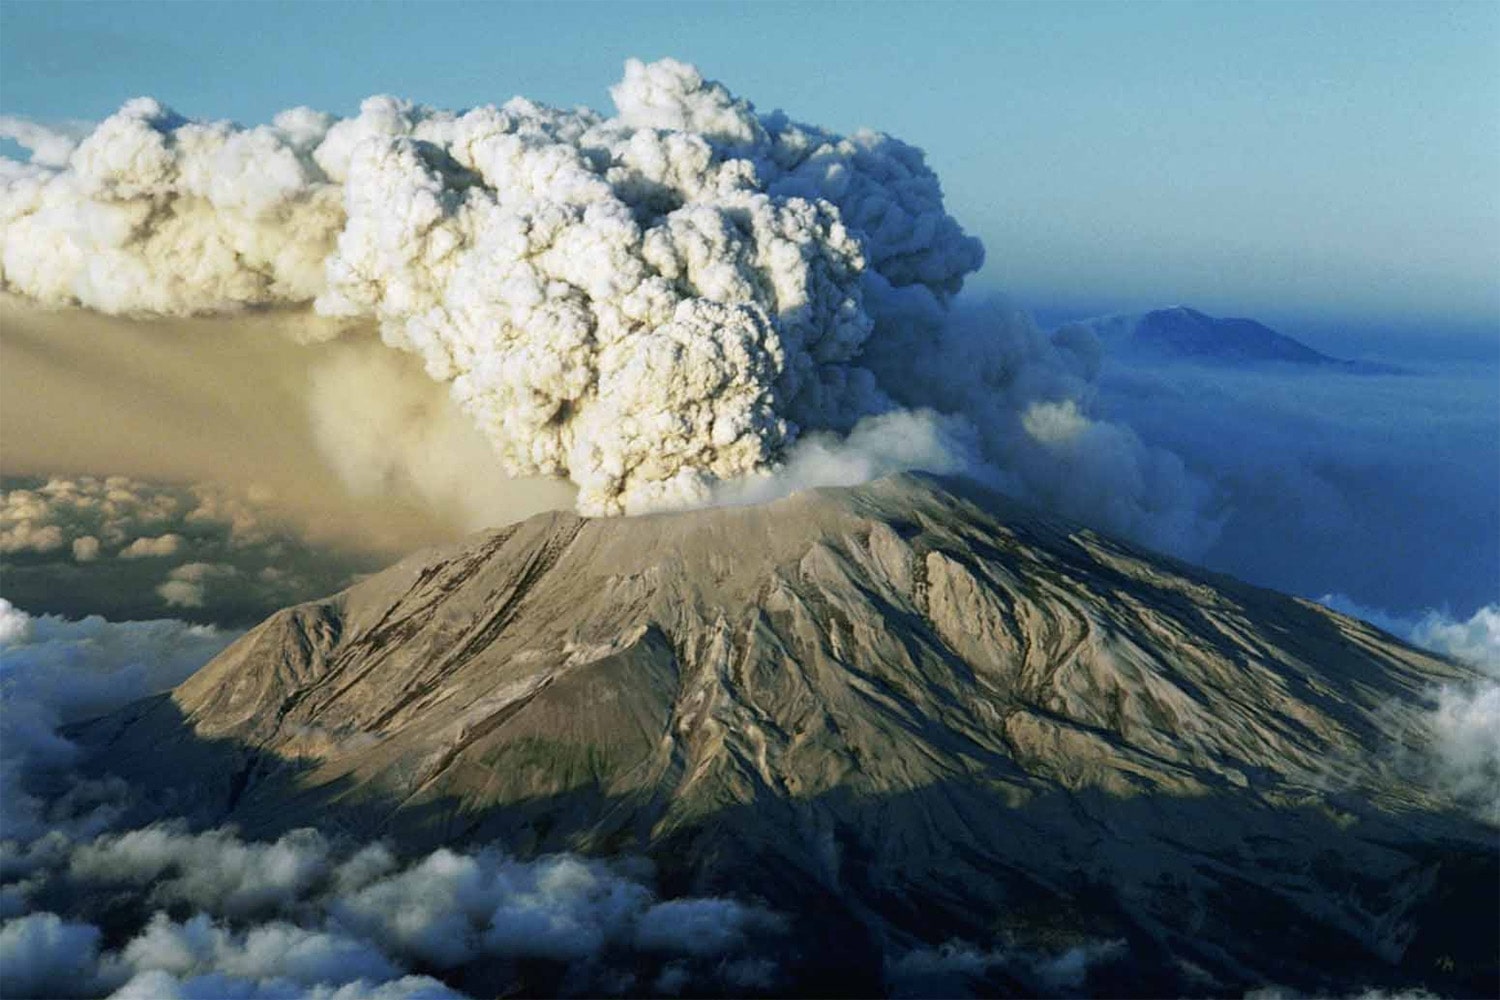 23 interesting facts about Volcanic ash clouds